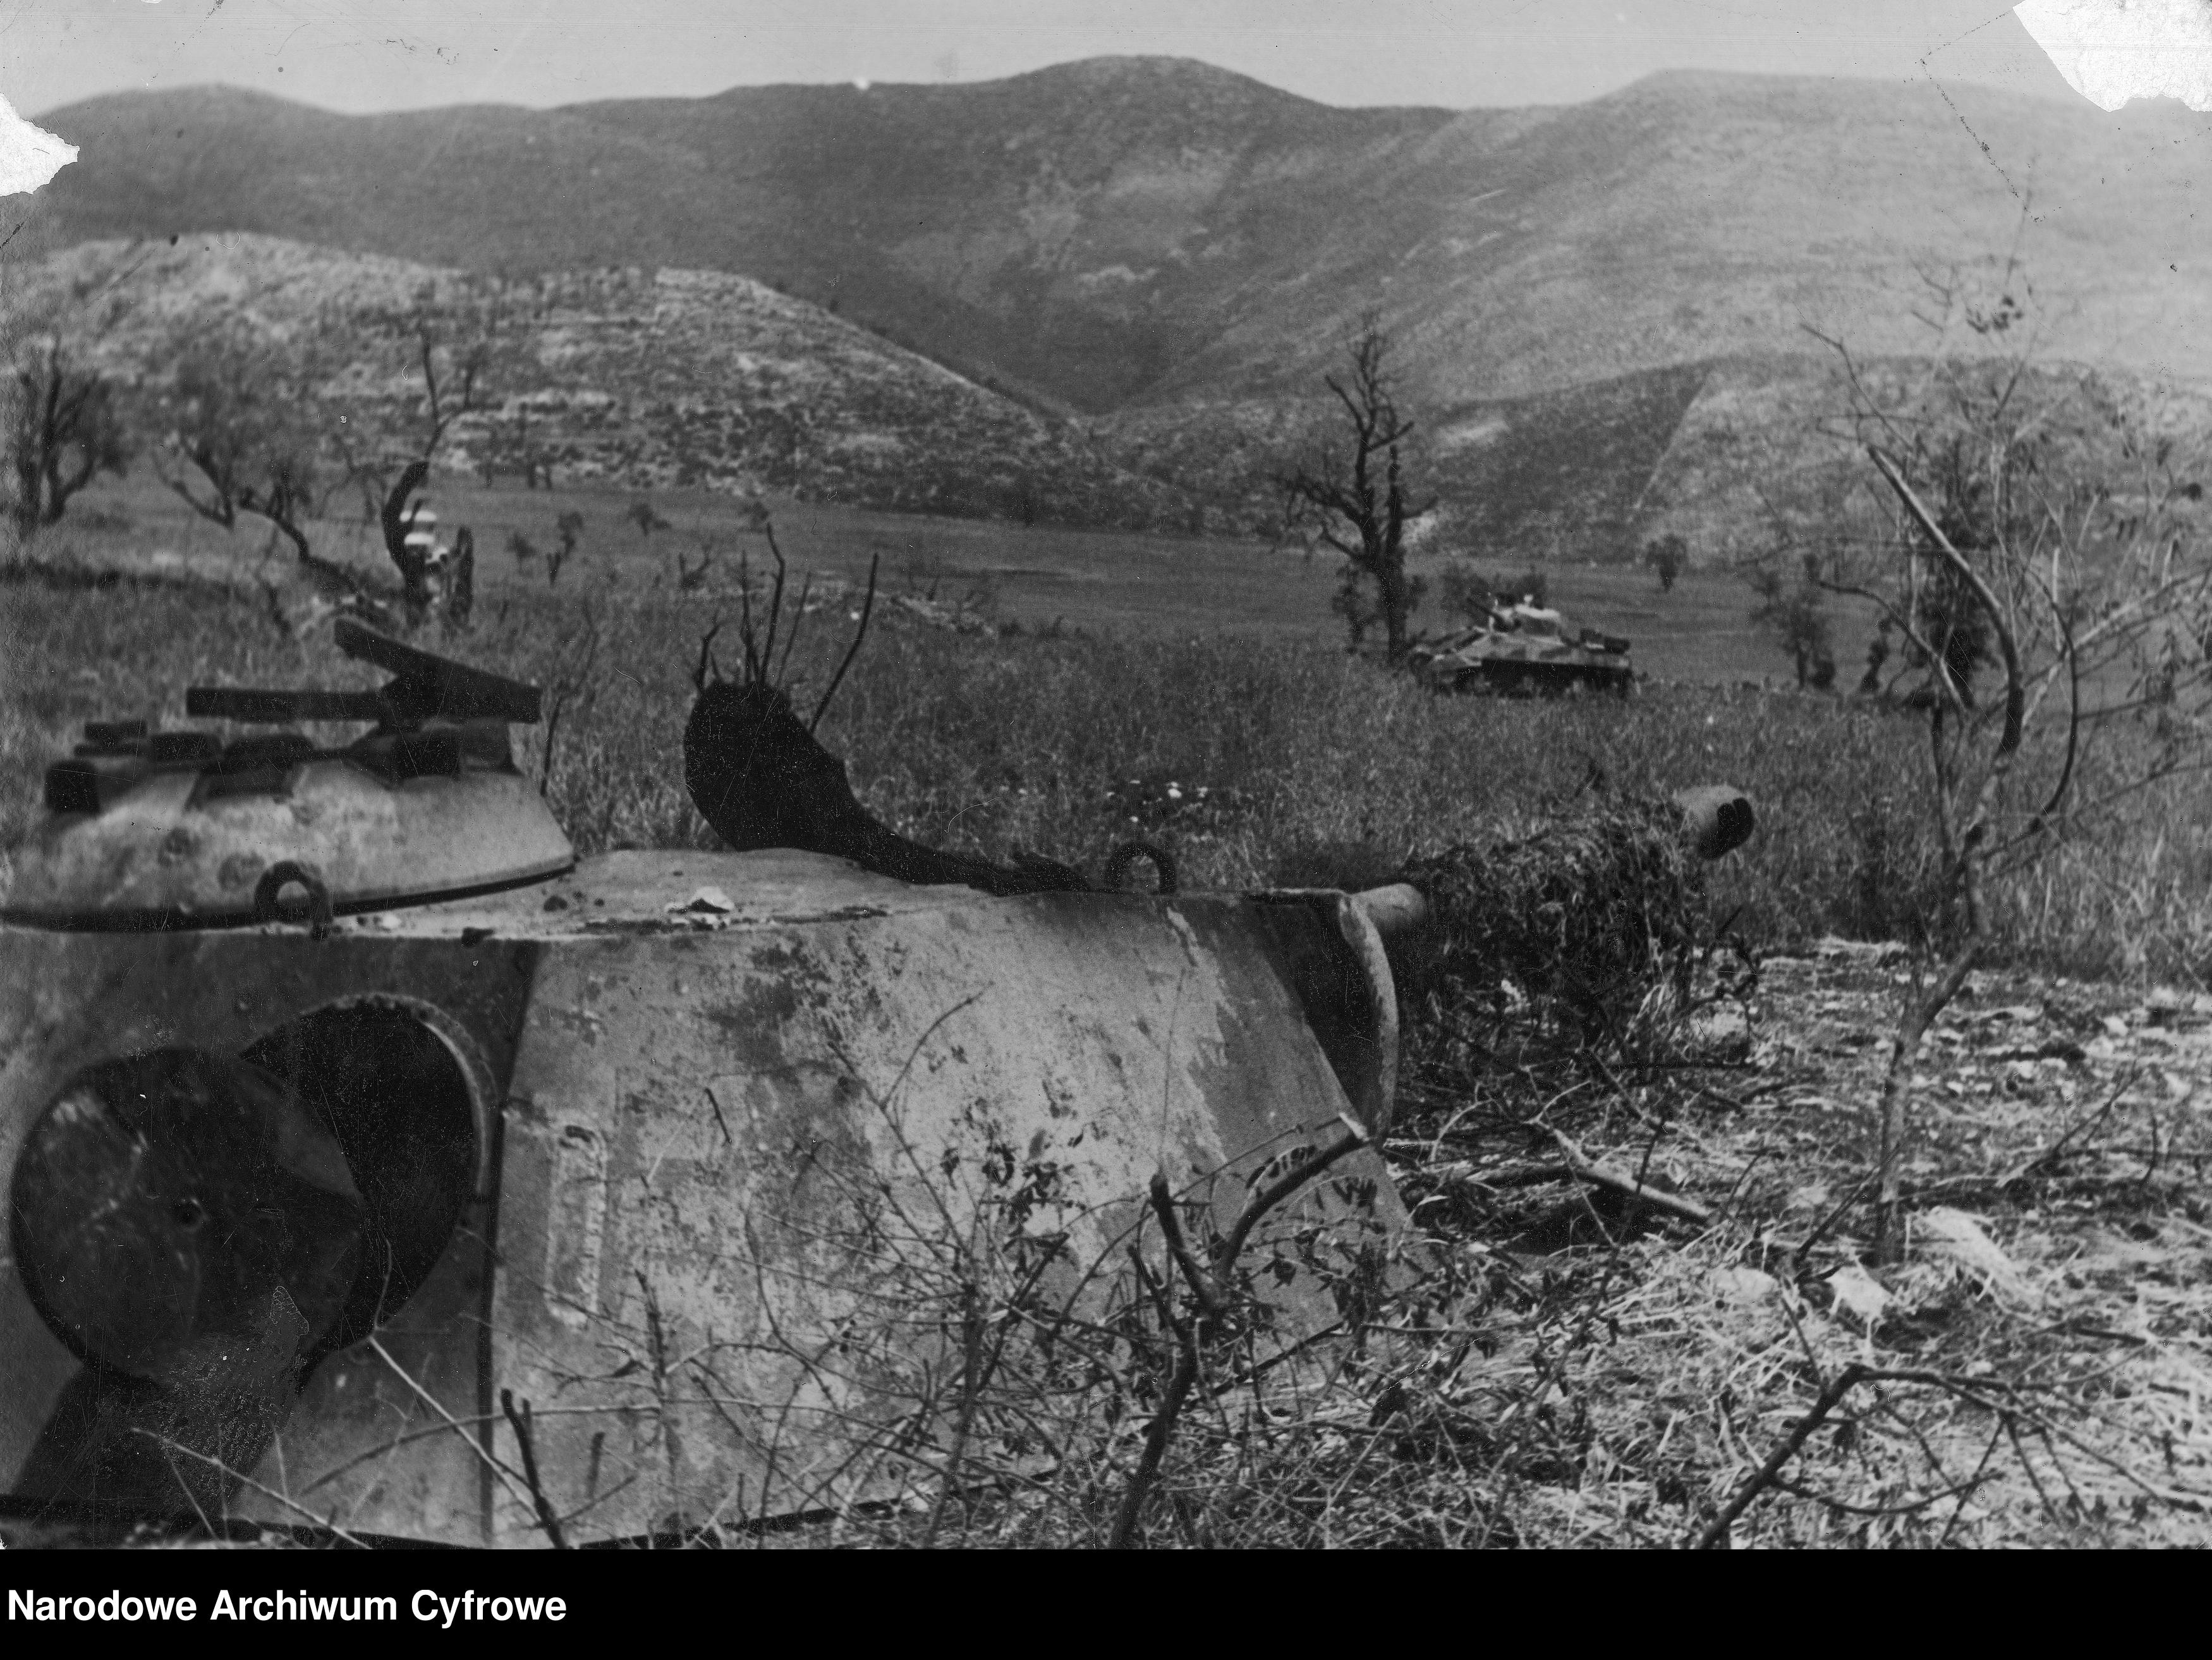 <p class='eng'>1944/05/24 - 1944/05/25<br />Fortified German artillery position Pantherturm on the outskirts of Piedimonte. In the background, the M4 Sherman tank from the 6th Armored Regiment "Dzieci Lwowskich".<br />NAC 3/24/0/-/460/17</p>